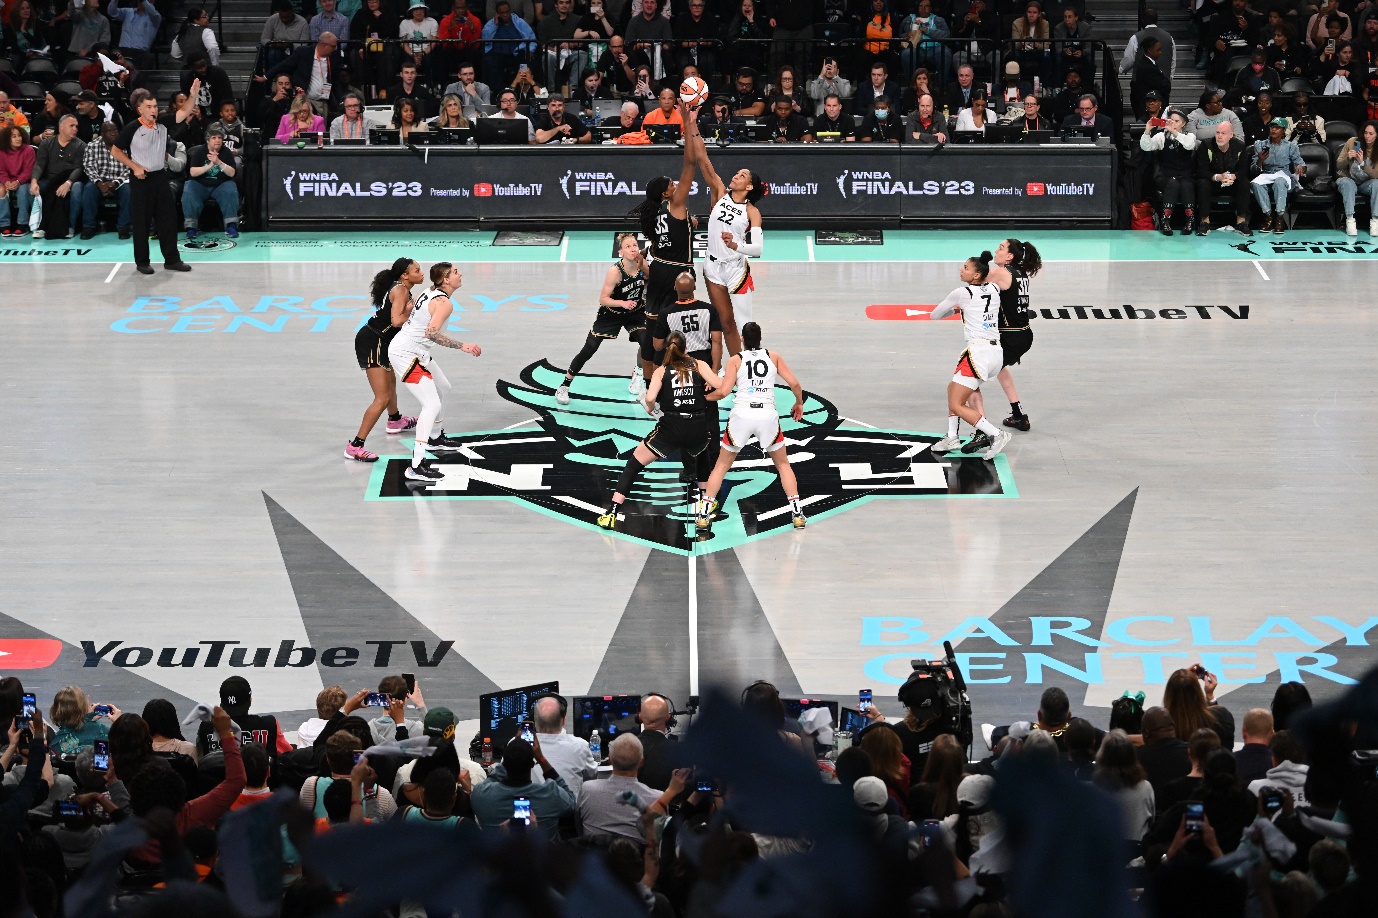 TNT Sports and WNBA reach a multi-year agreement to broadcast games in the UK and Ireland